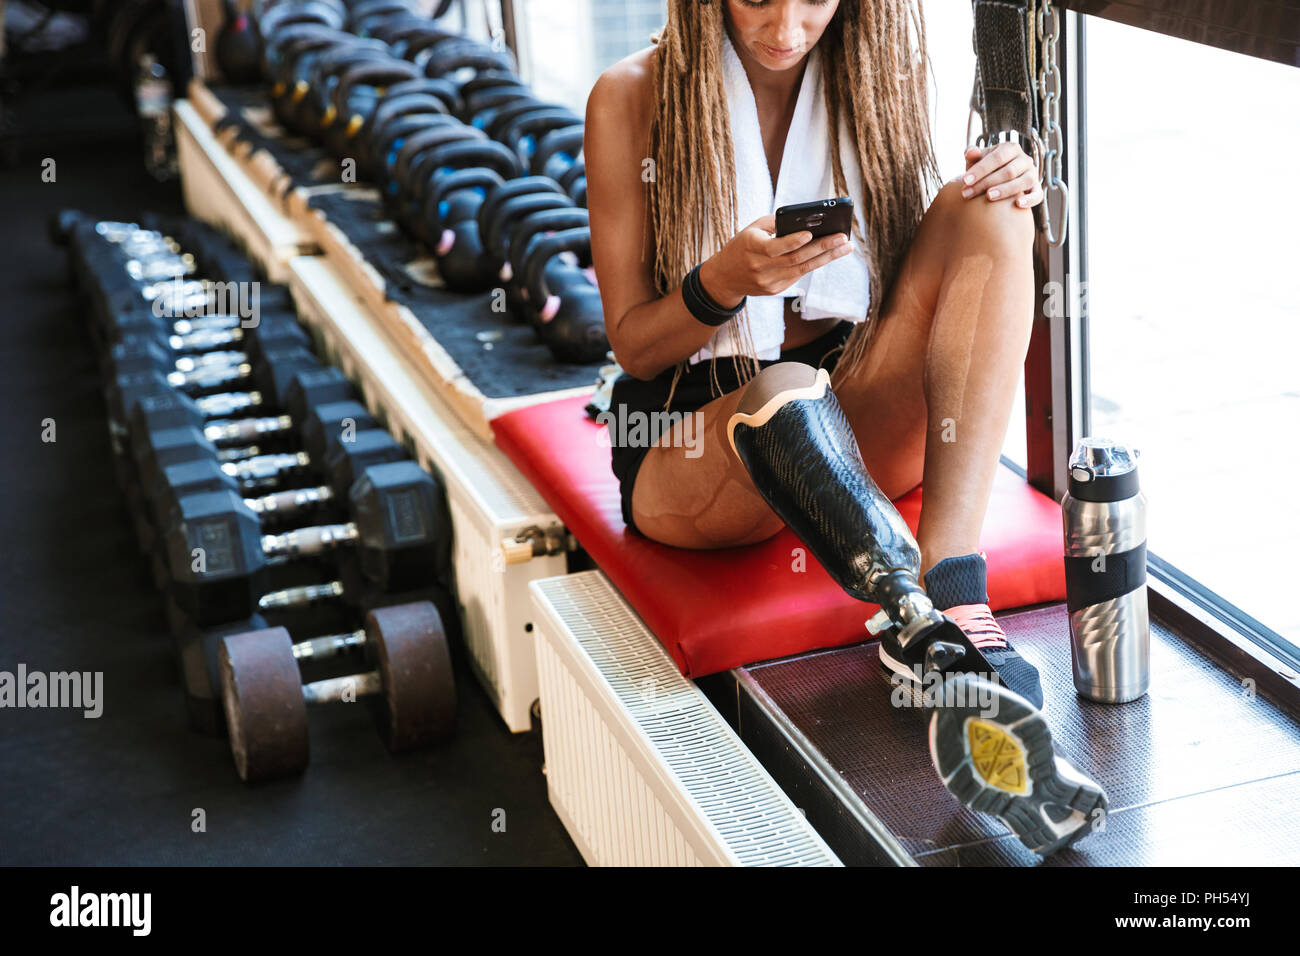 Image of strong disabled sports woman sitting in gym using mobile phone. Stock Photo